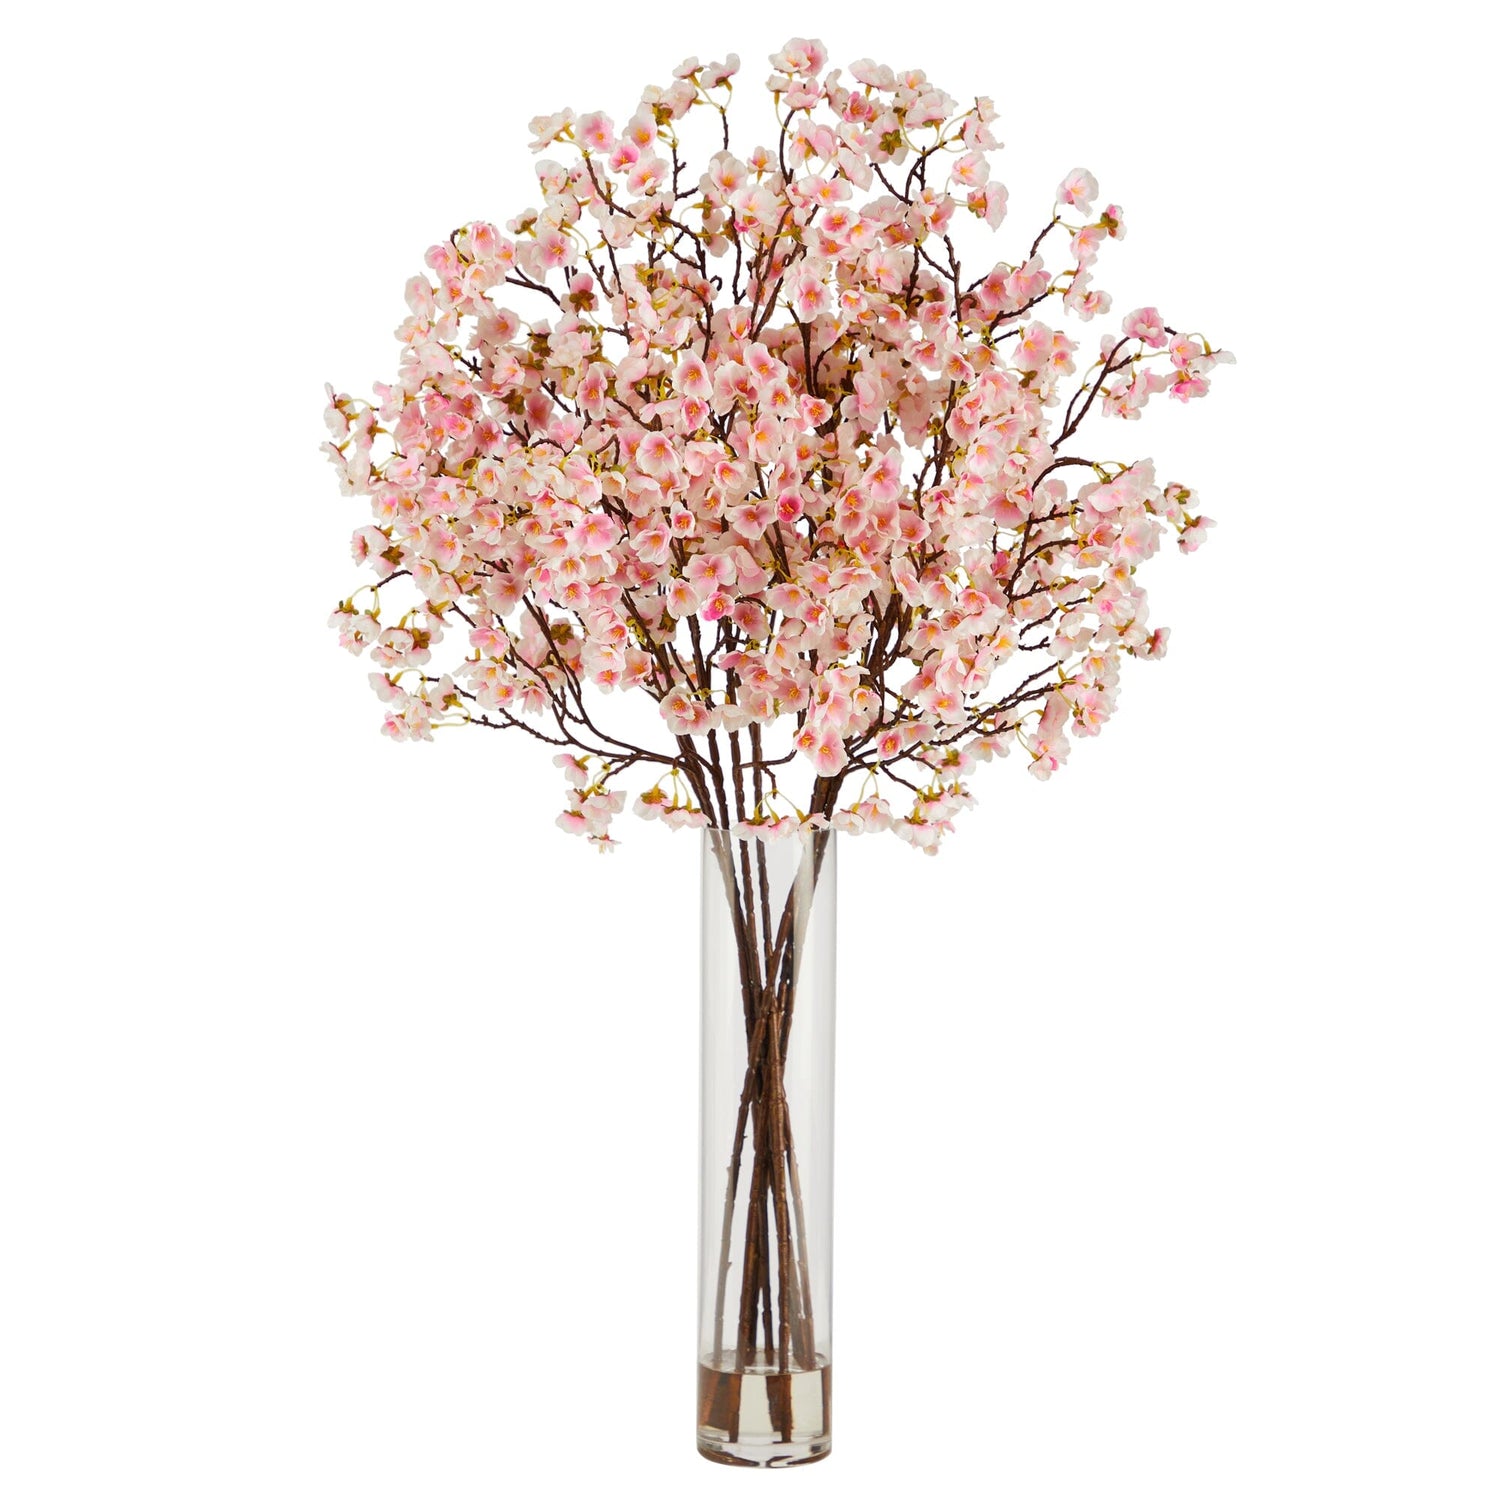 32” Artificial Cherry Blossom Arrangement with Glass Cylinder Vase